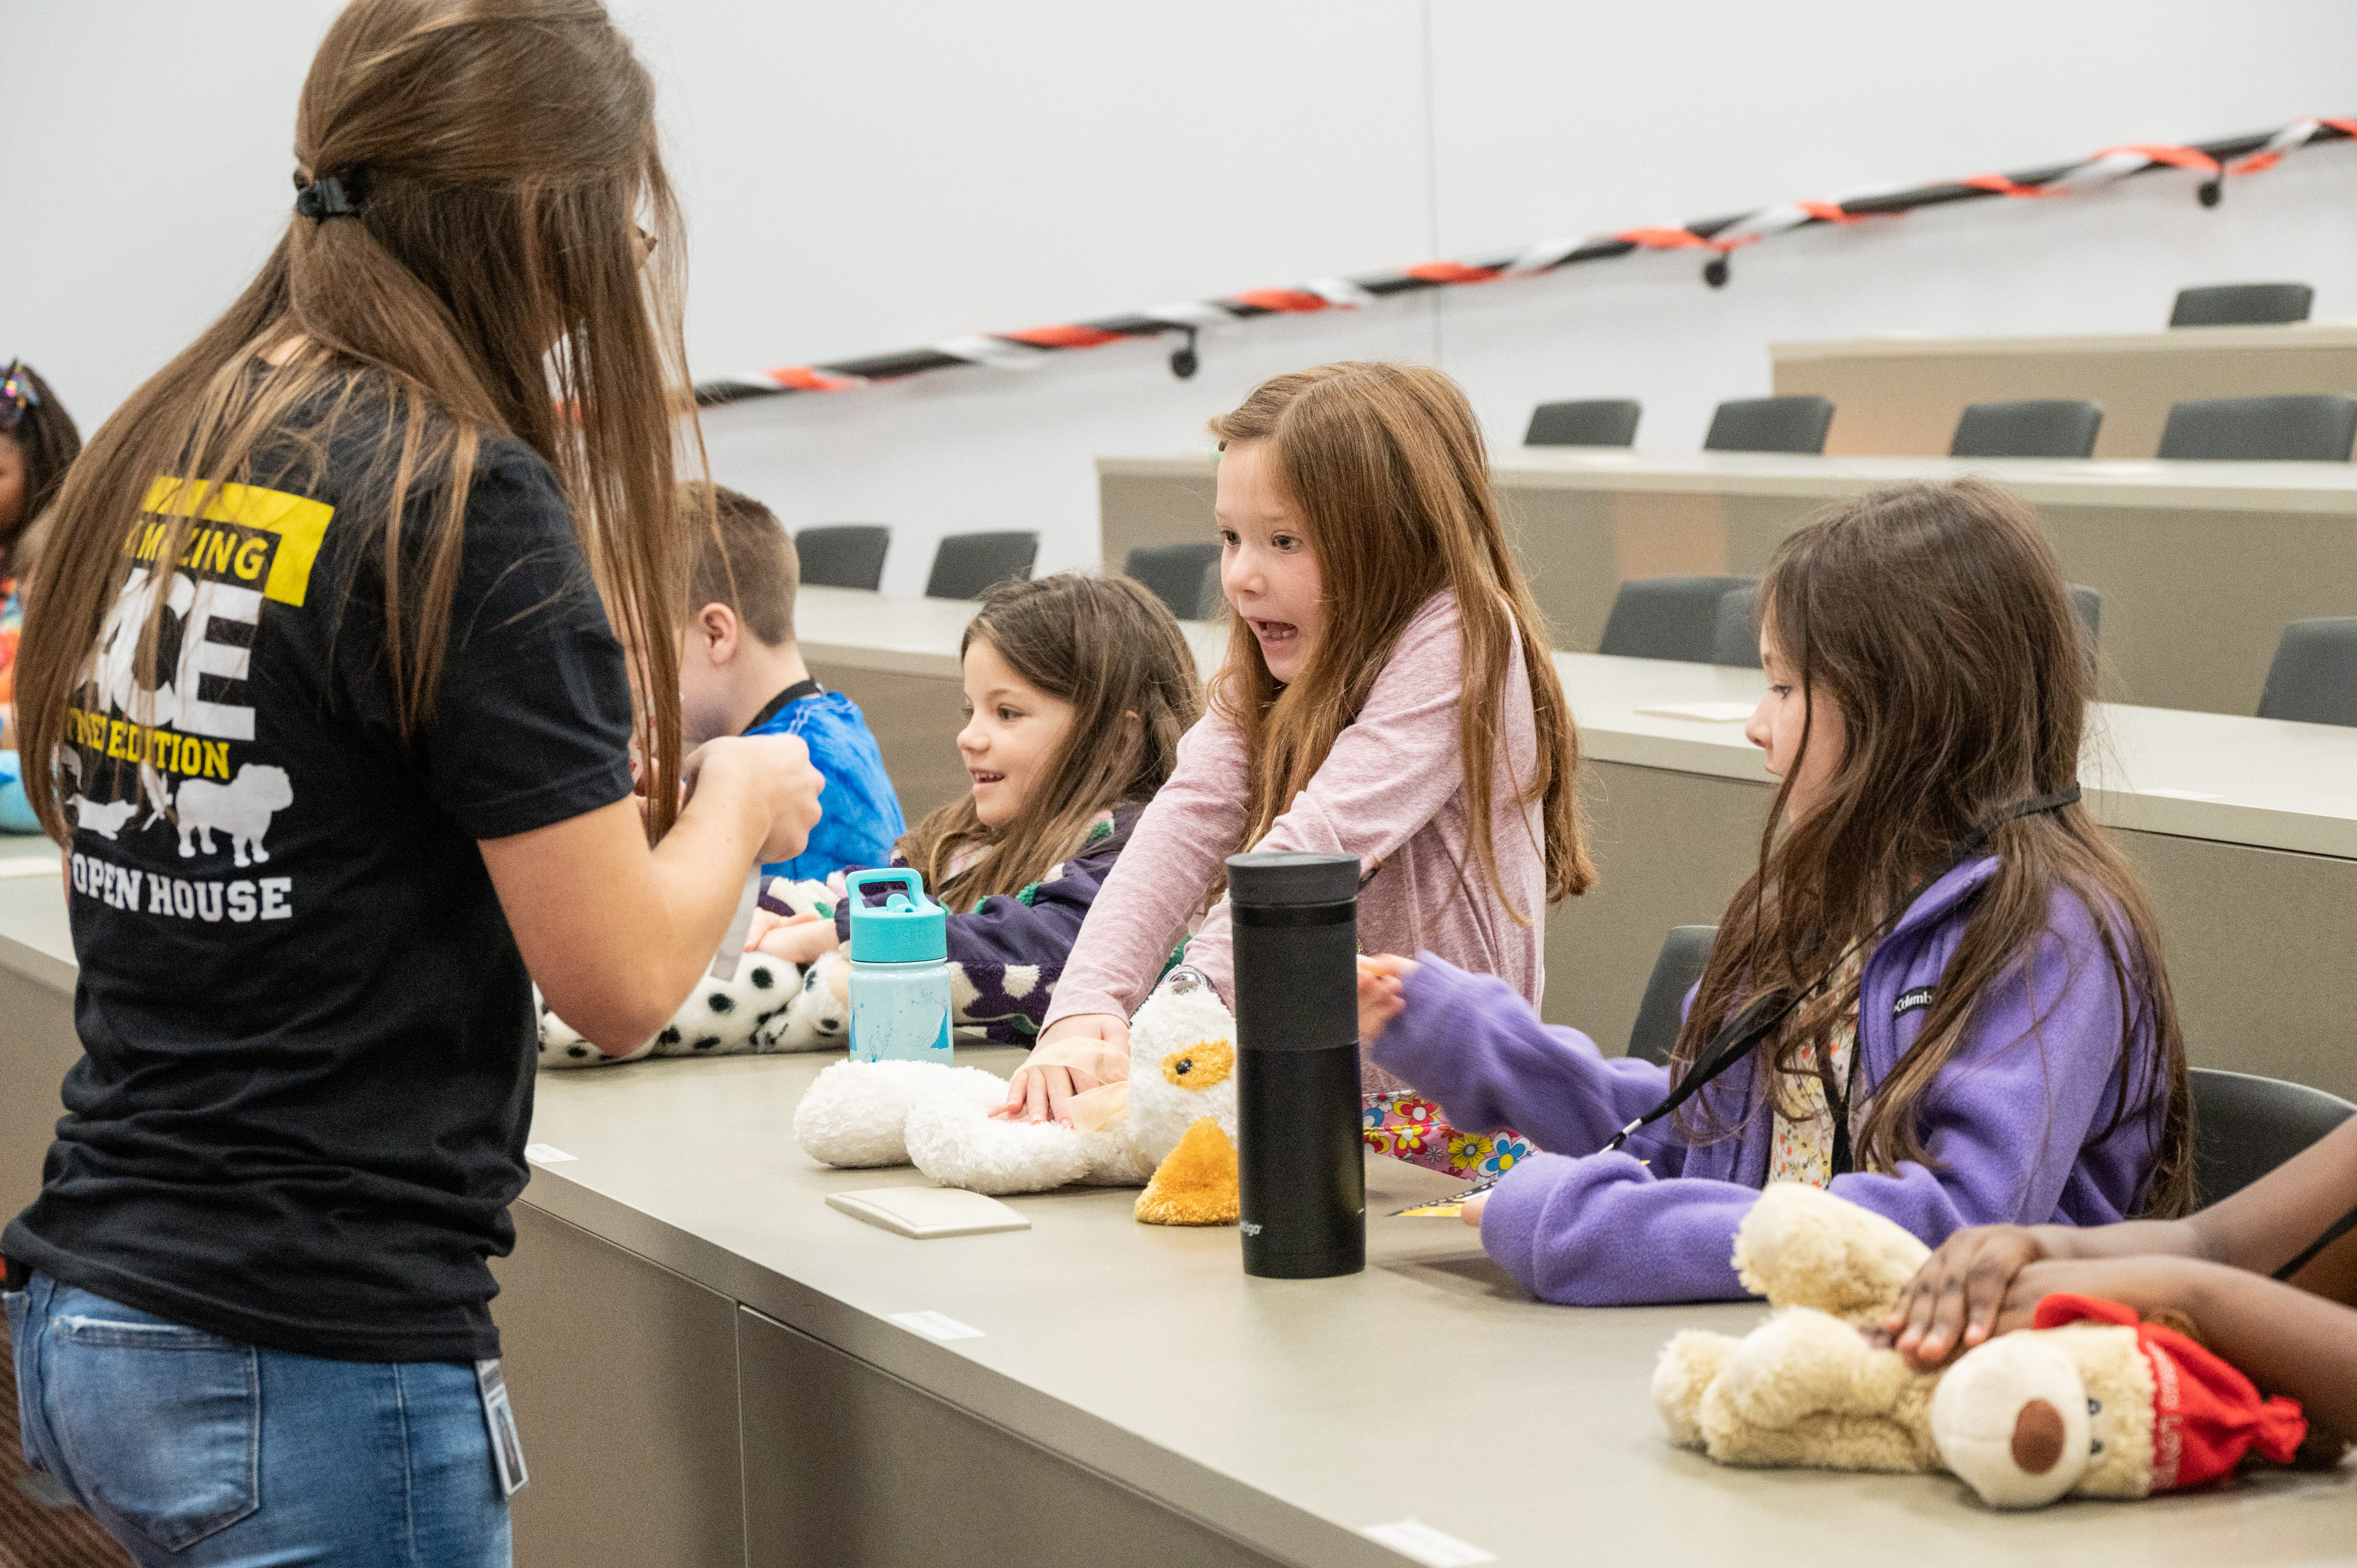 Young children learn canine CPR from a veterinary student